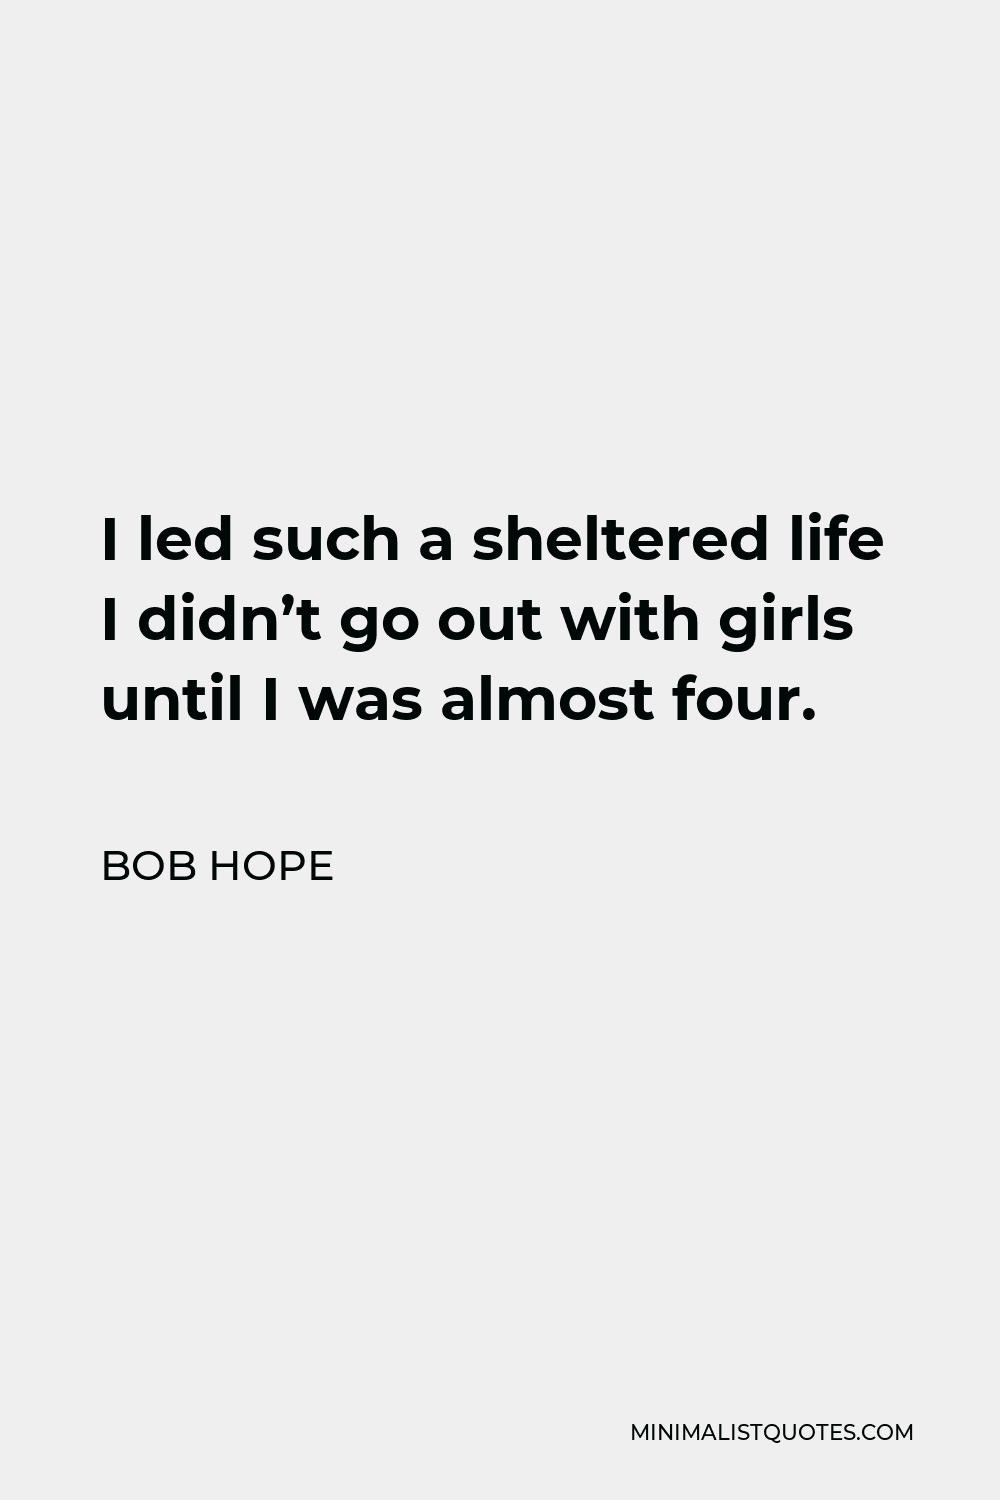 Bob Hope Quote - I led such a sheltered life I didn’t go out with girls until I was almost four.